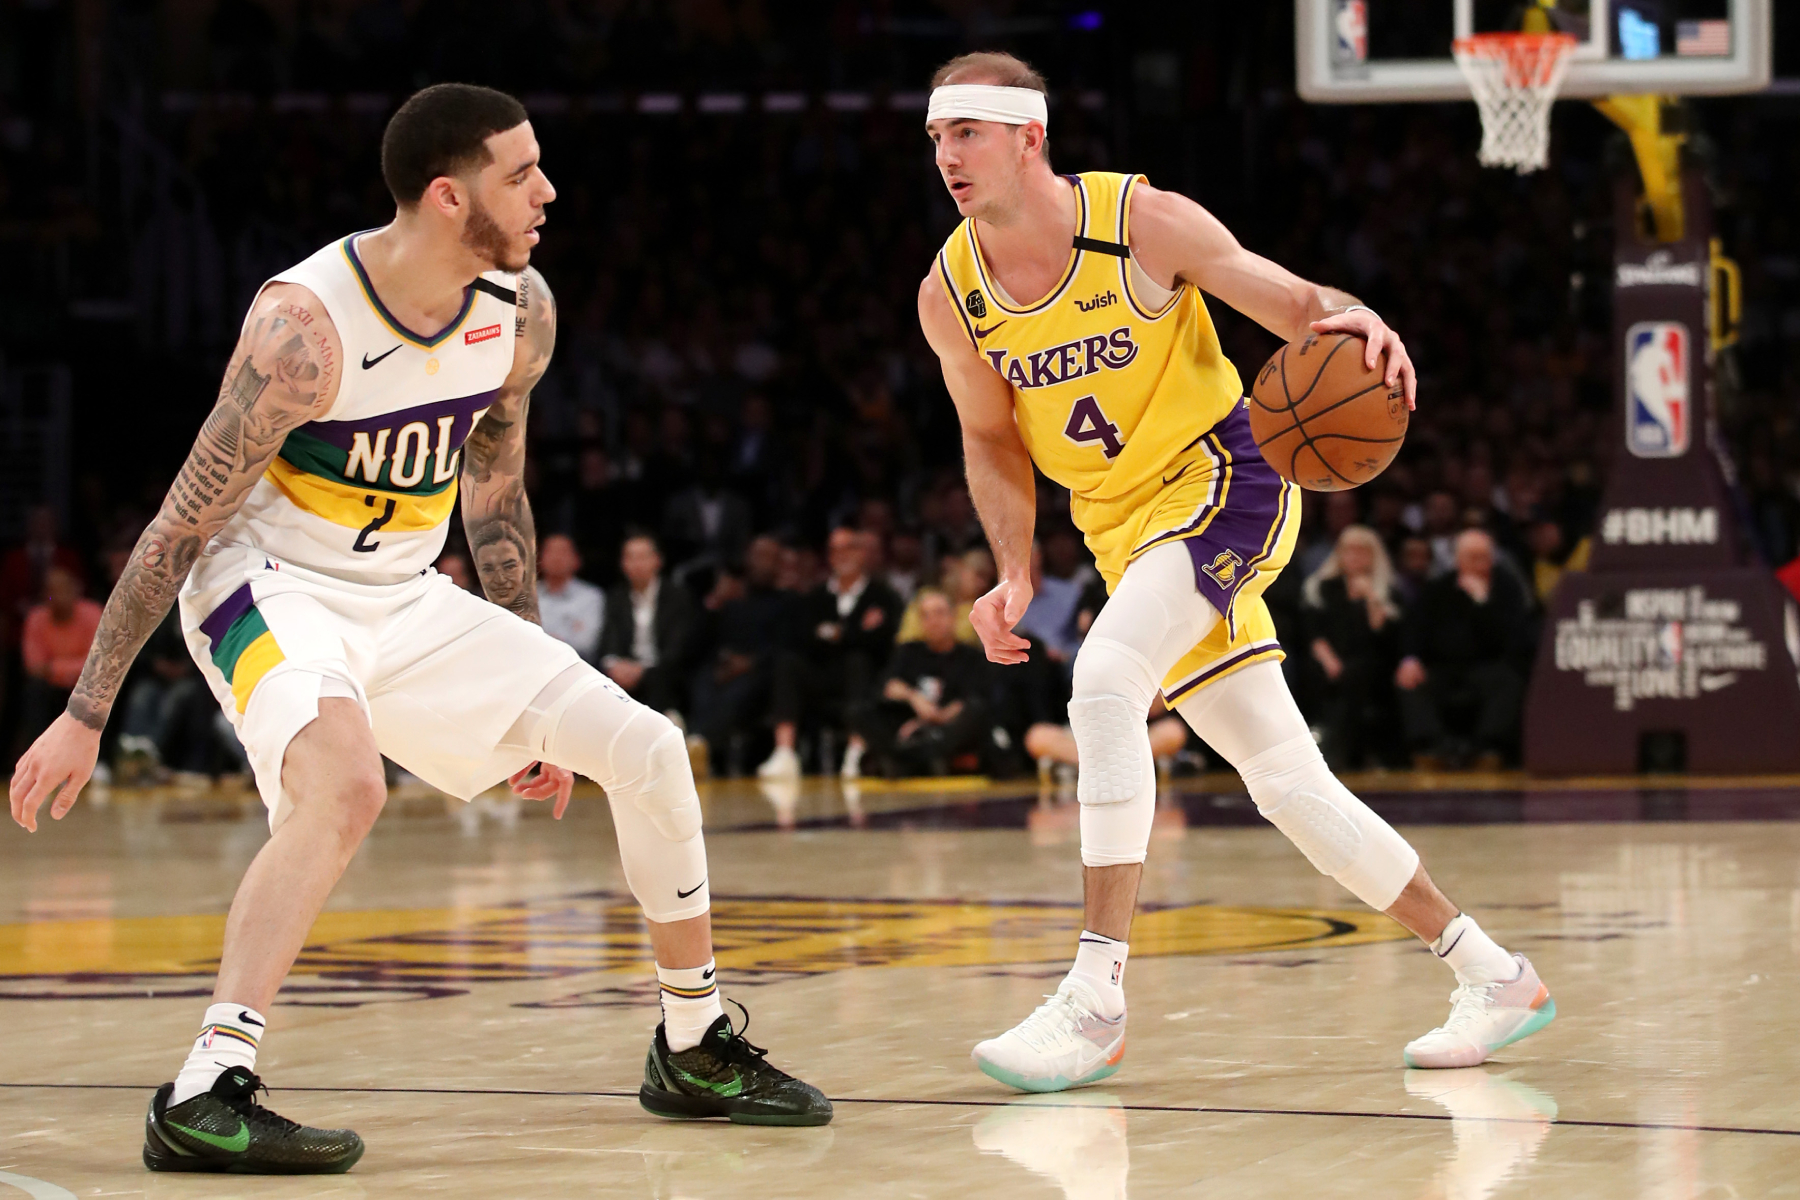 Alex Caruso has become an essential piece on the LA Lakers. So, before he became an NBA star, what college team did Caruso play on?